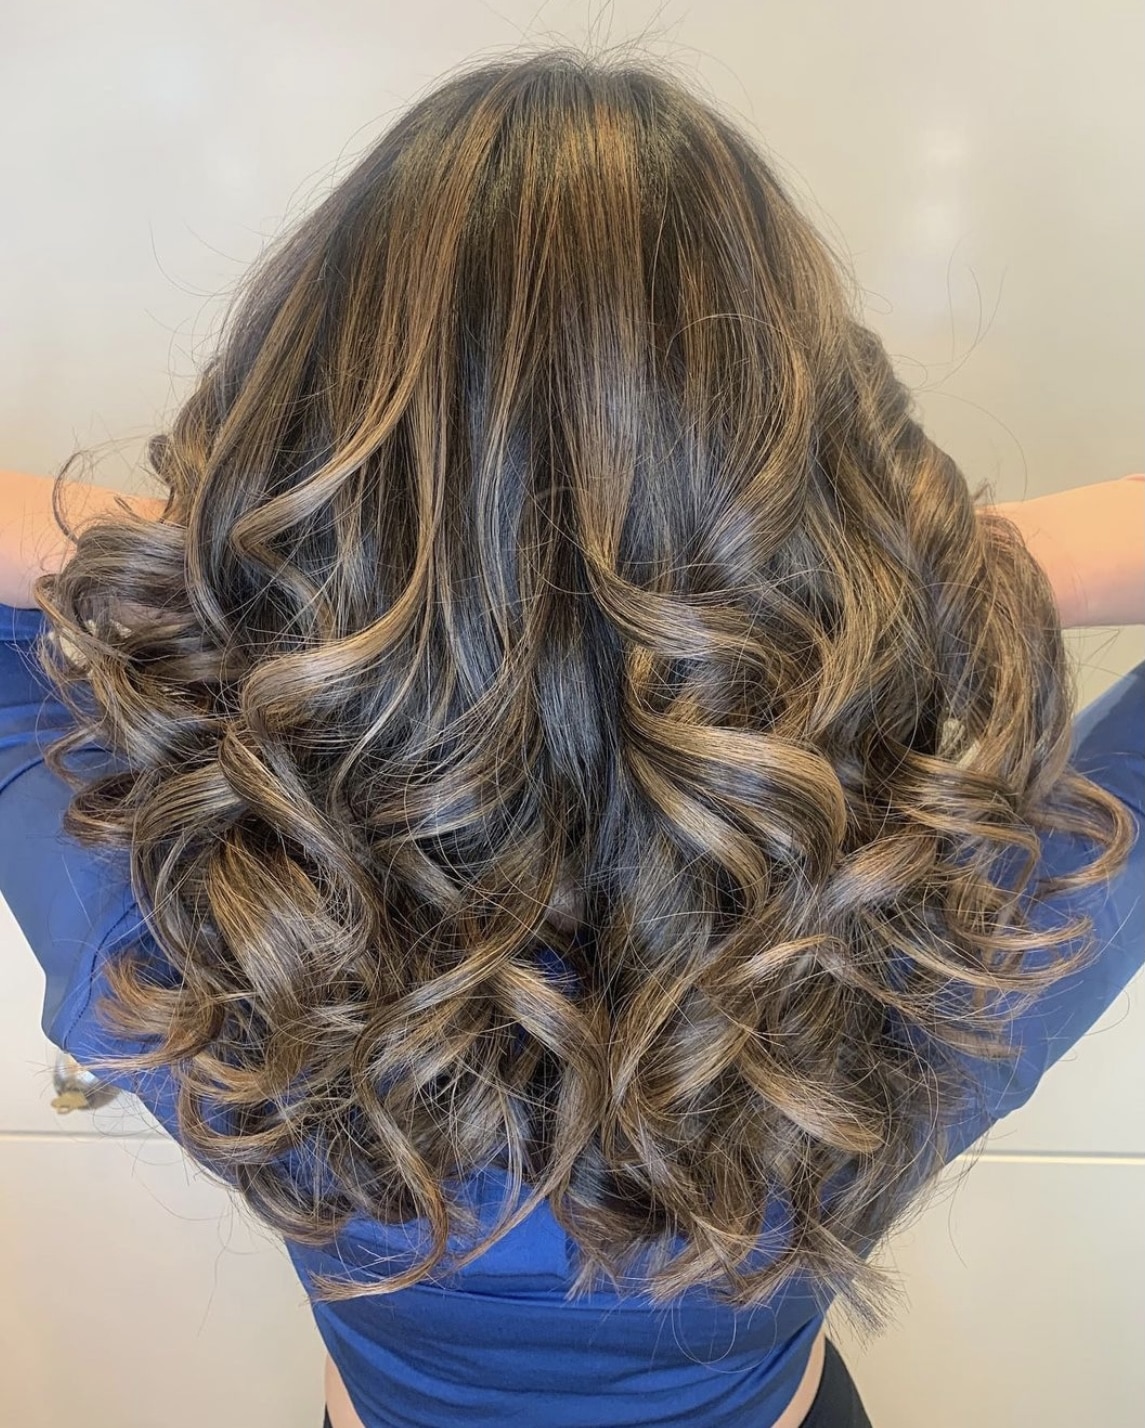 How to Find the Best Winter Park Hair Salon? Get the Best Hair Style